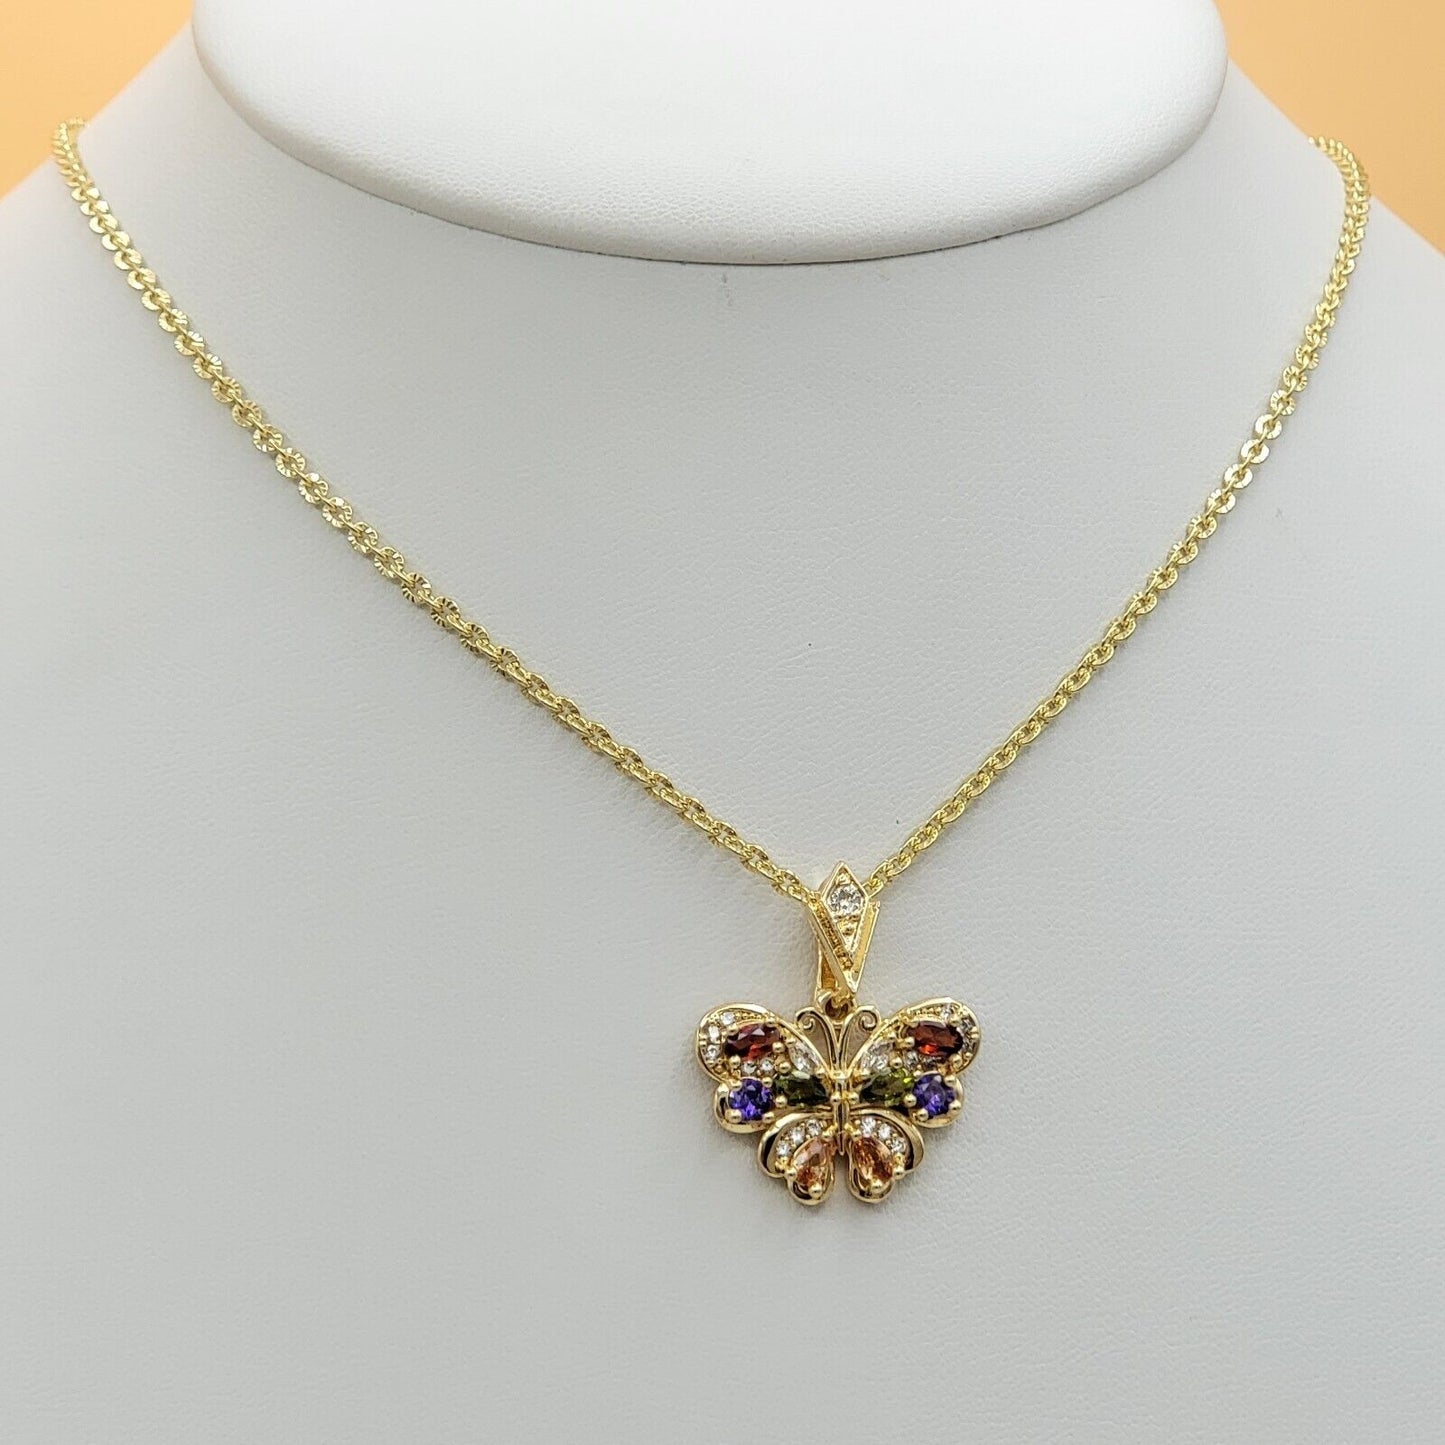 Necklaces - 14K Gold Plated. Multicolor Crystals Butterfly Pendant & Chain.